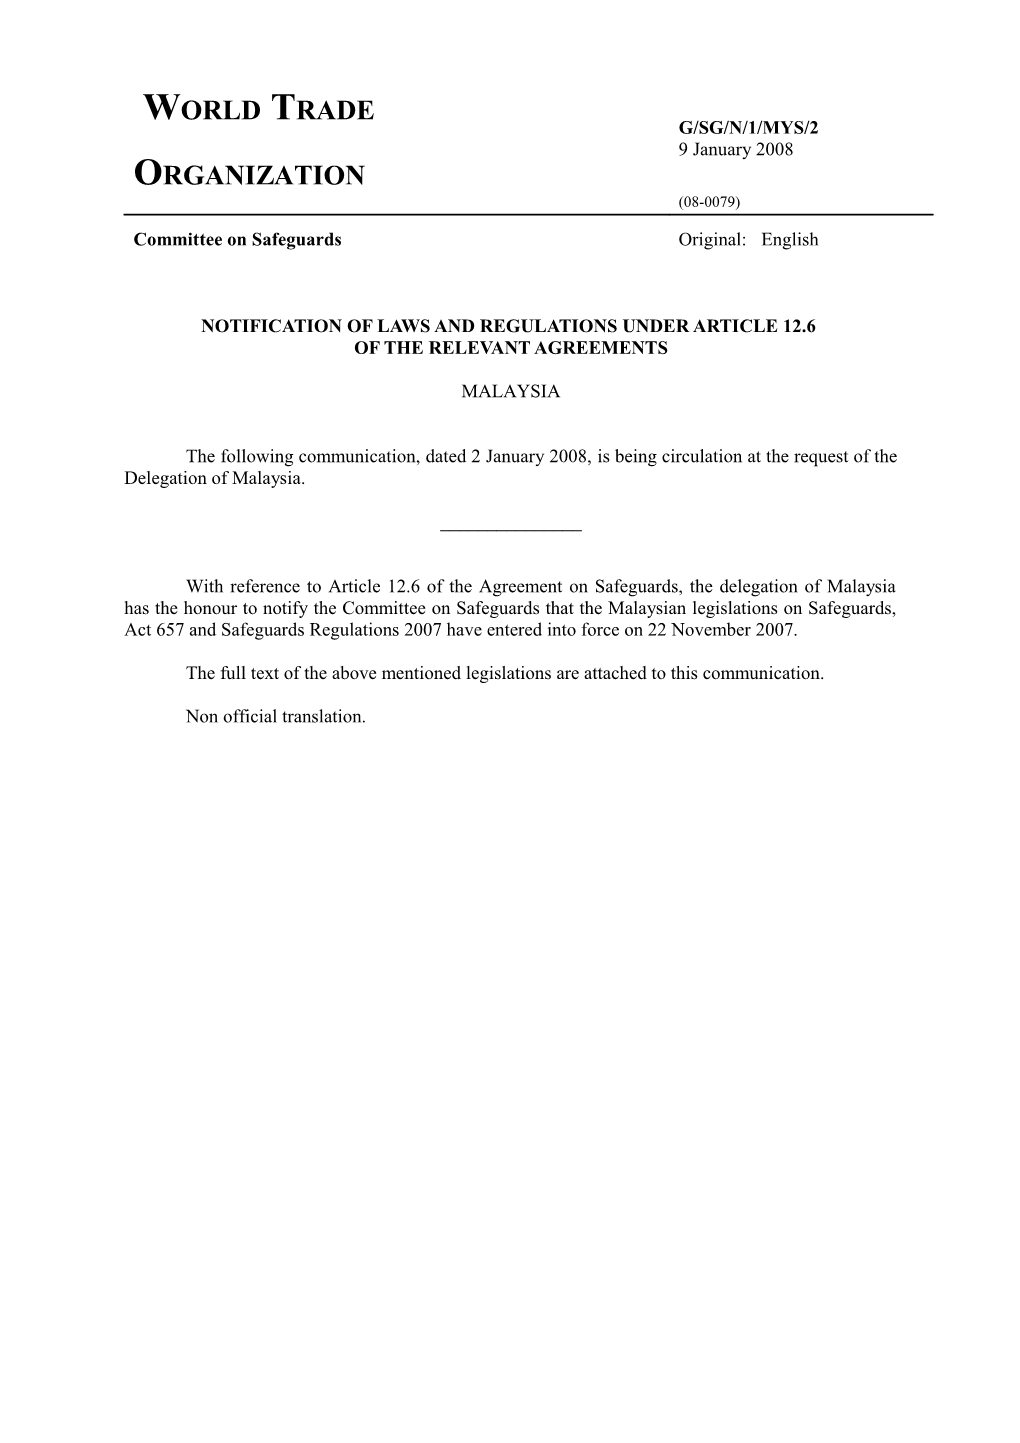 Notification of Laws and Regulations Under Article 12.6